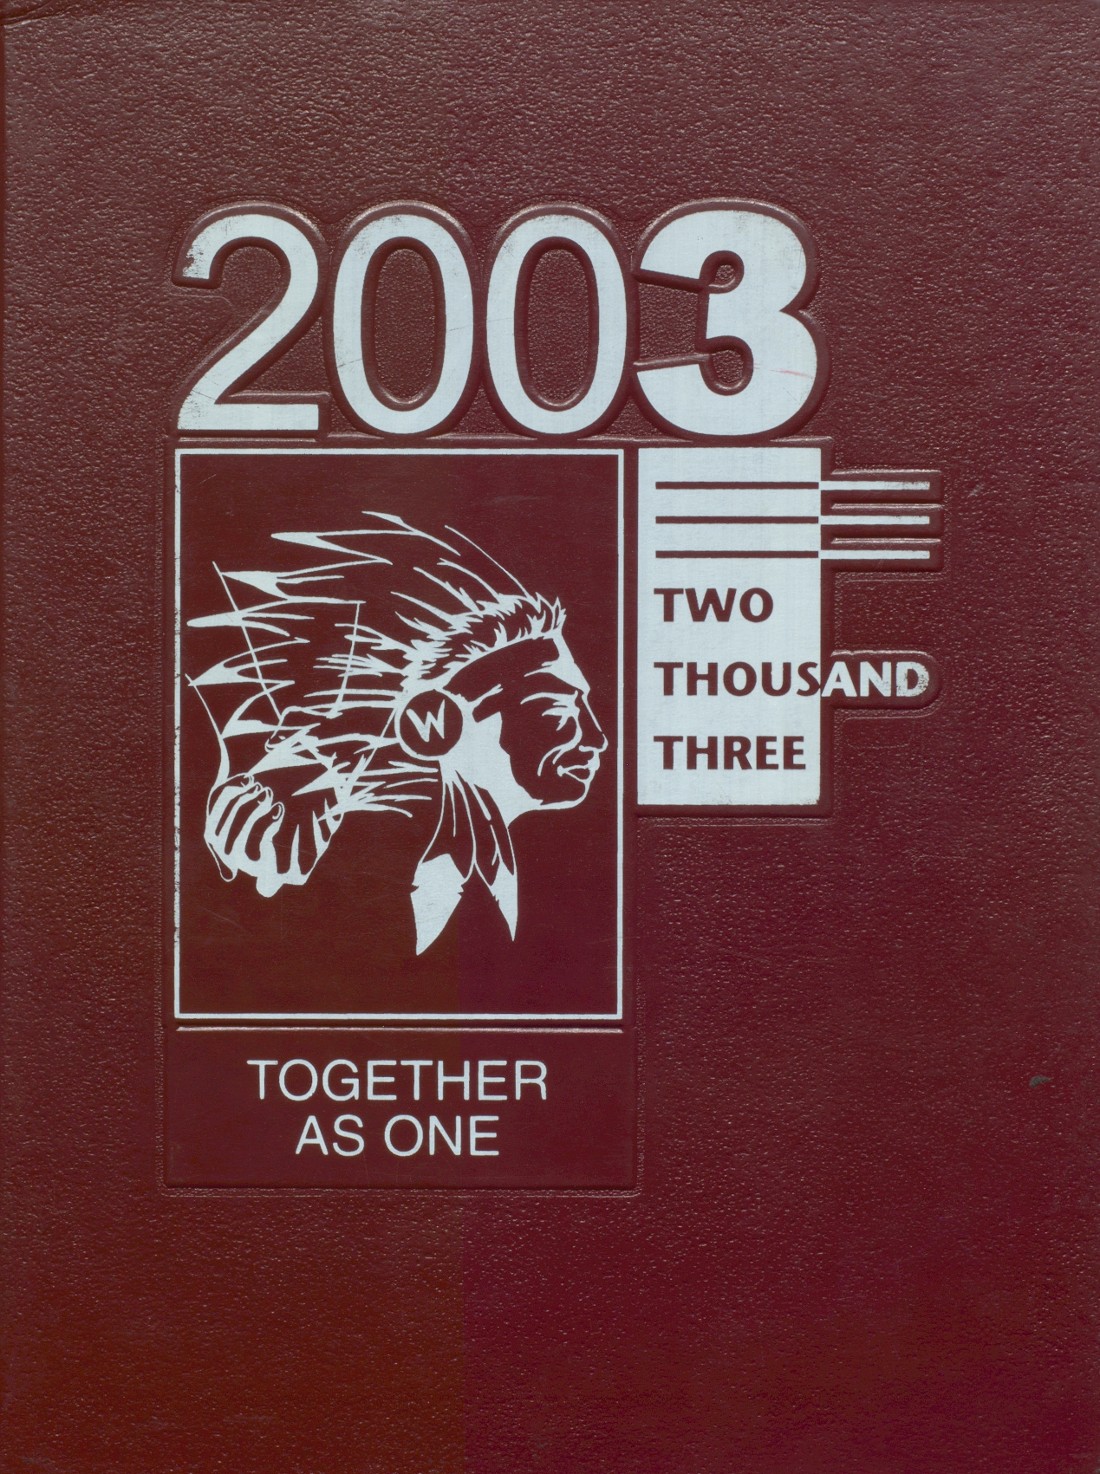 2003 yearbook from Woonsocket High School from Woonsocket, Rhode Island